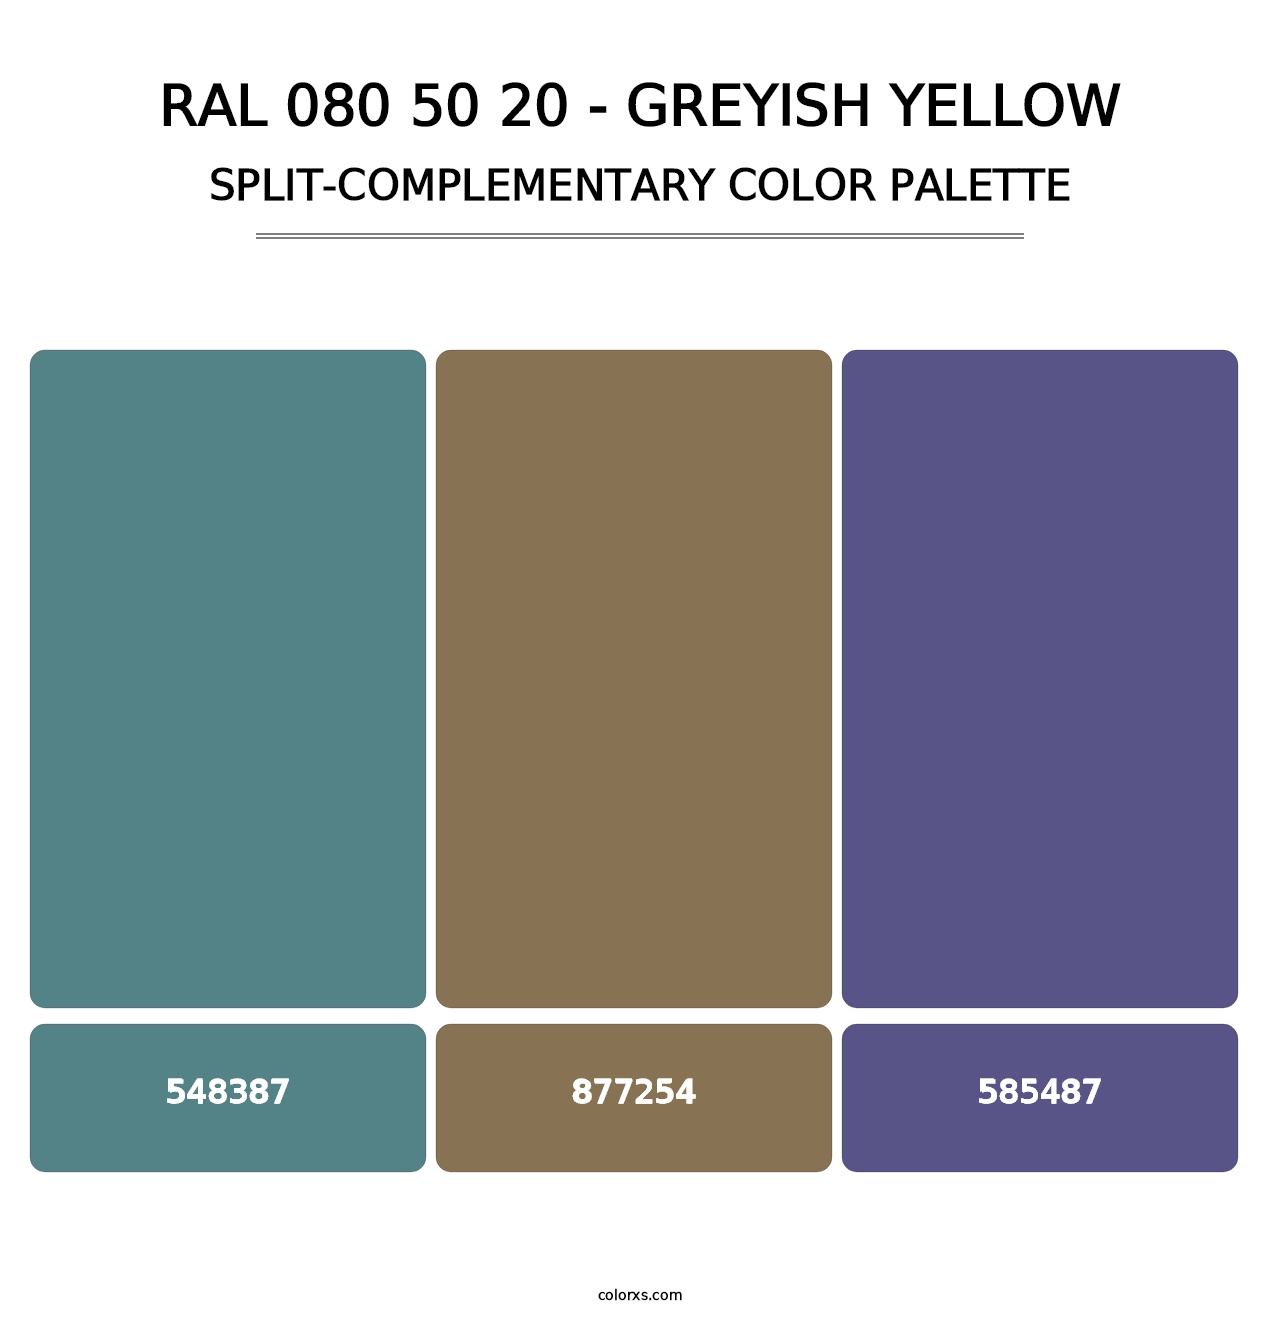 RAL 080 50 20 - Greyish Yellow - Split-Complementary Color Palette